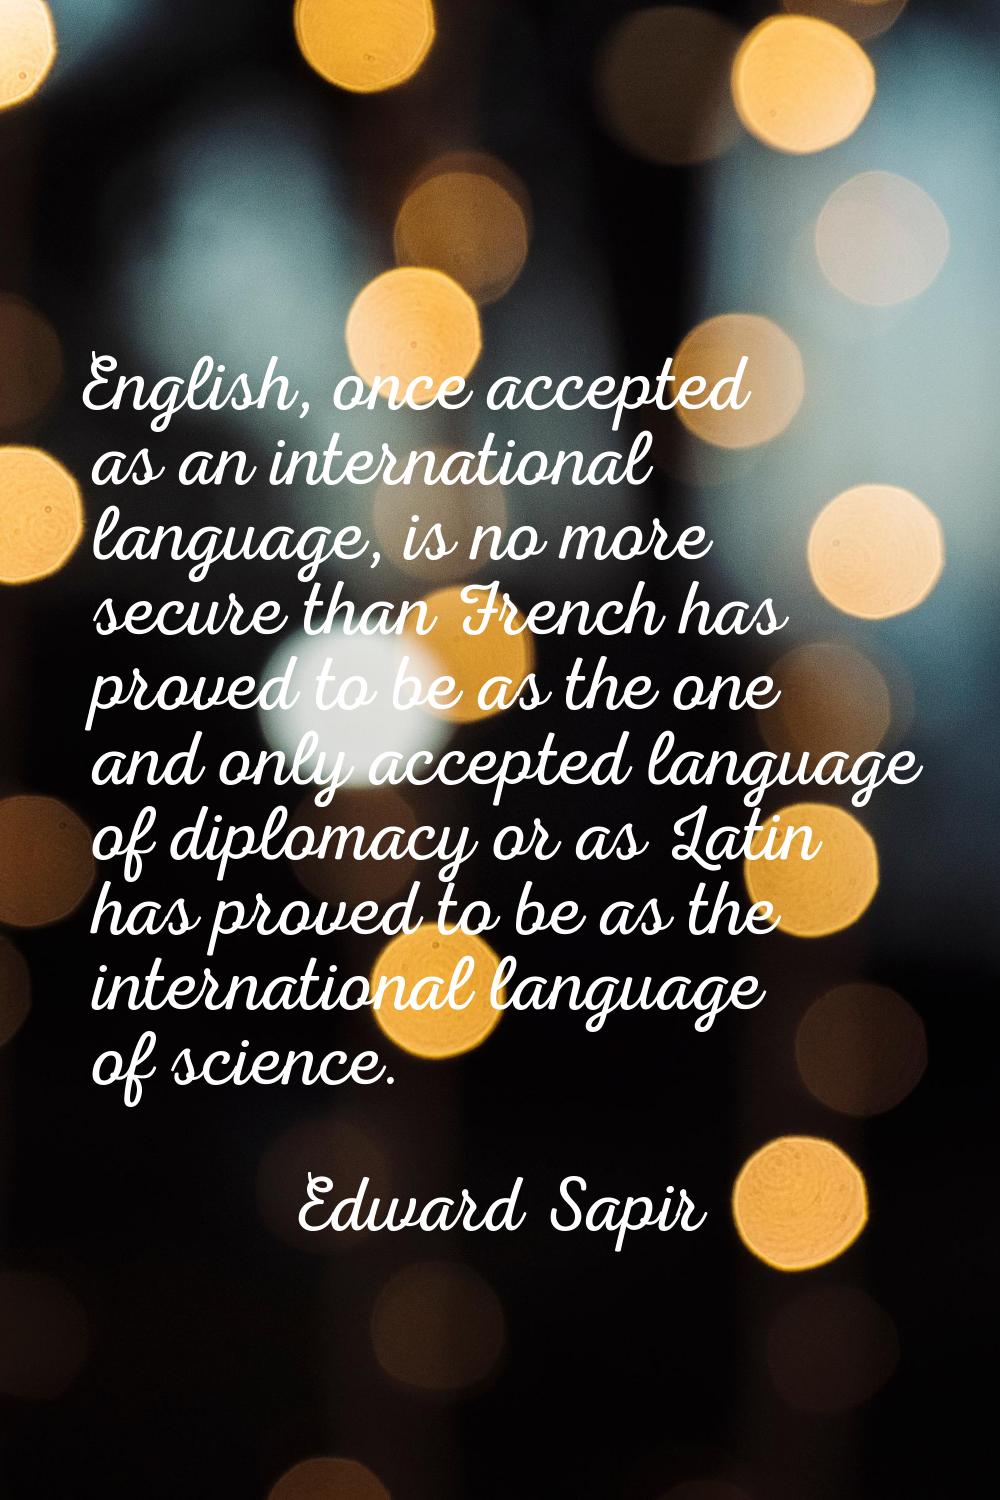 English, once accepted as an international language, is no more secure than French has proved to be